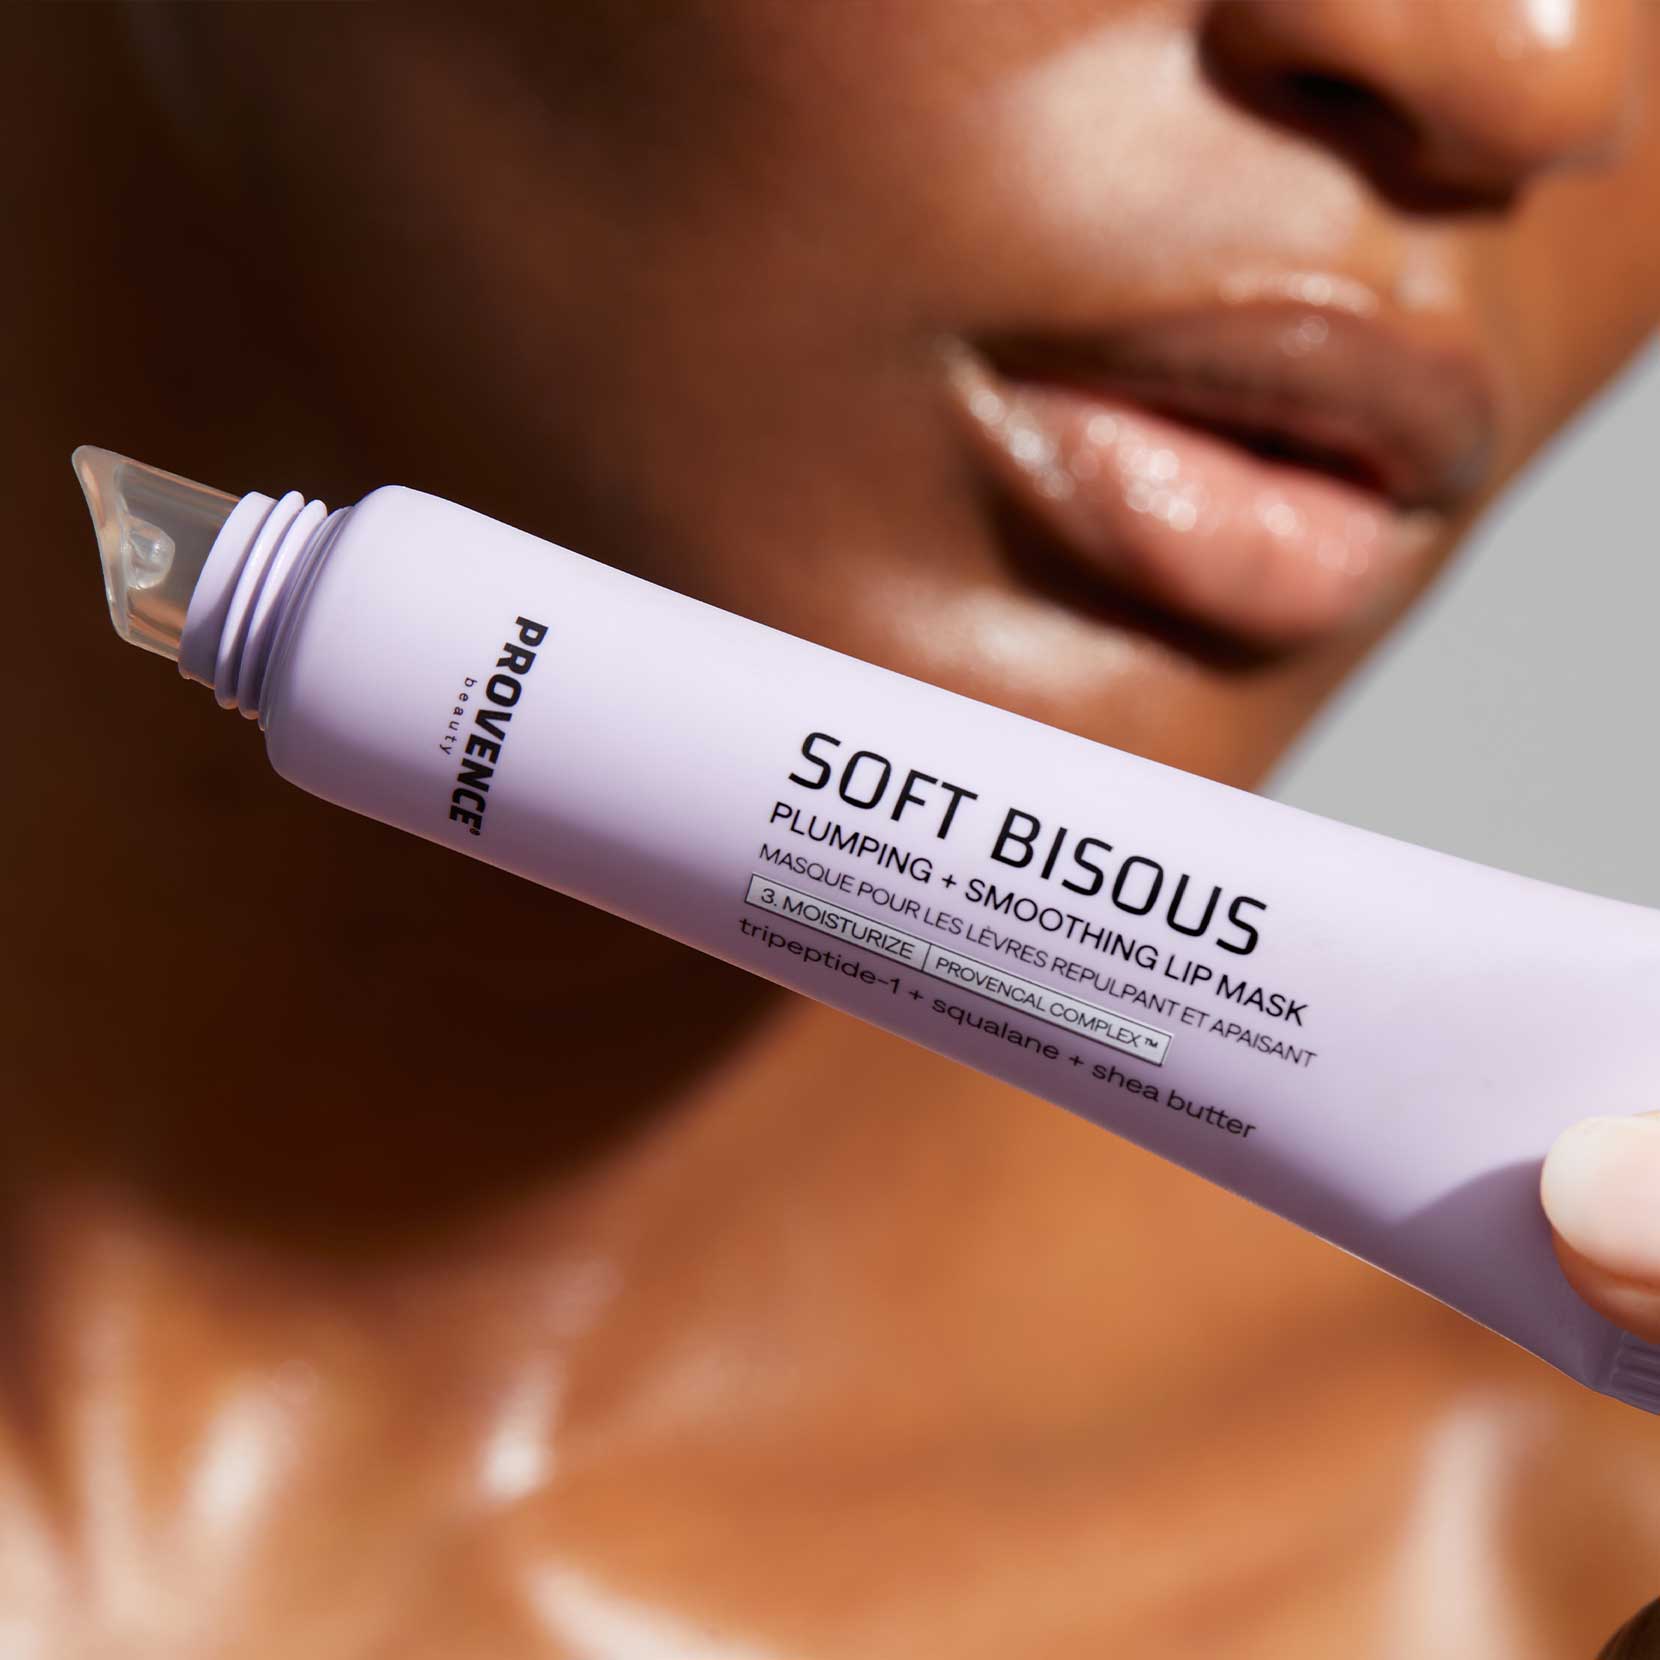 Soft Bisous Plumping + Smoothing Lip Mask